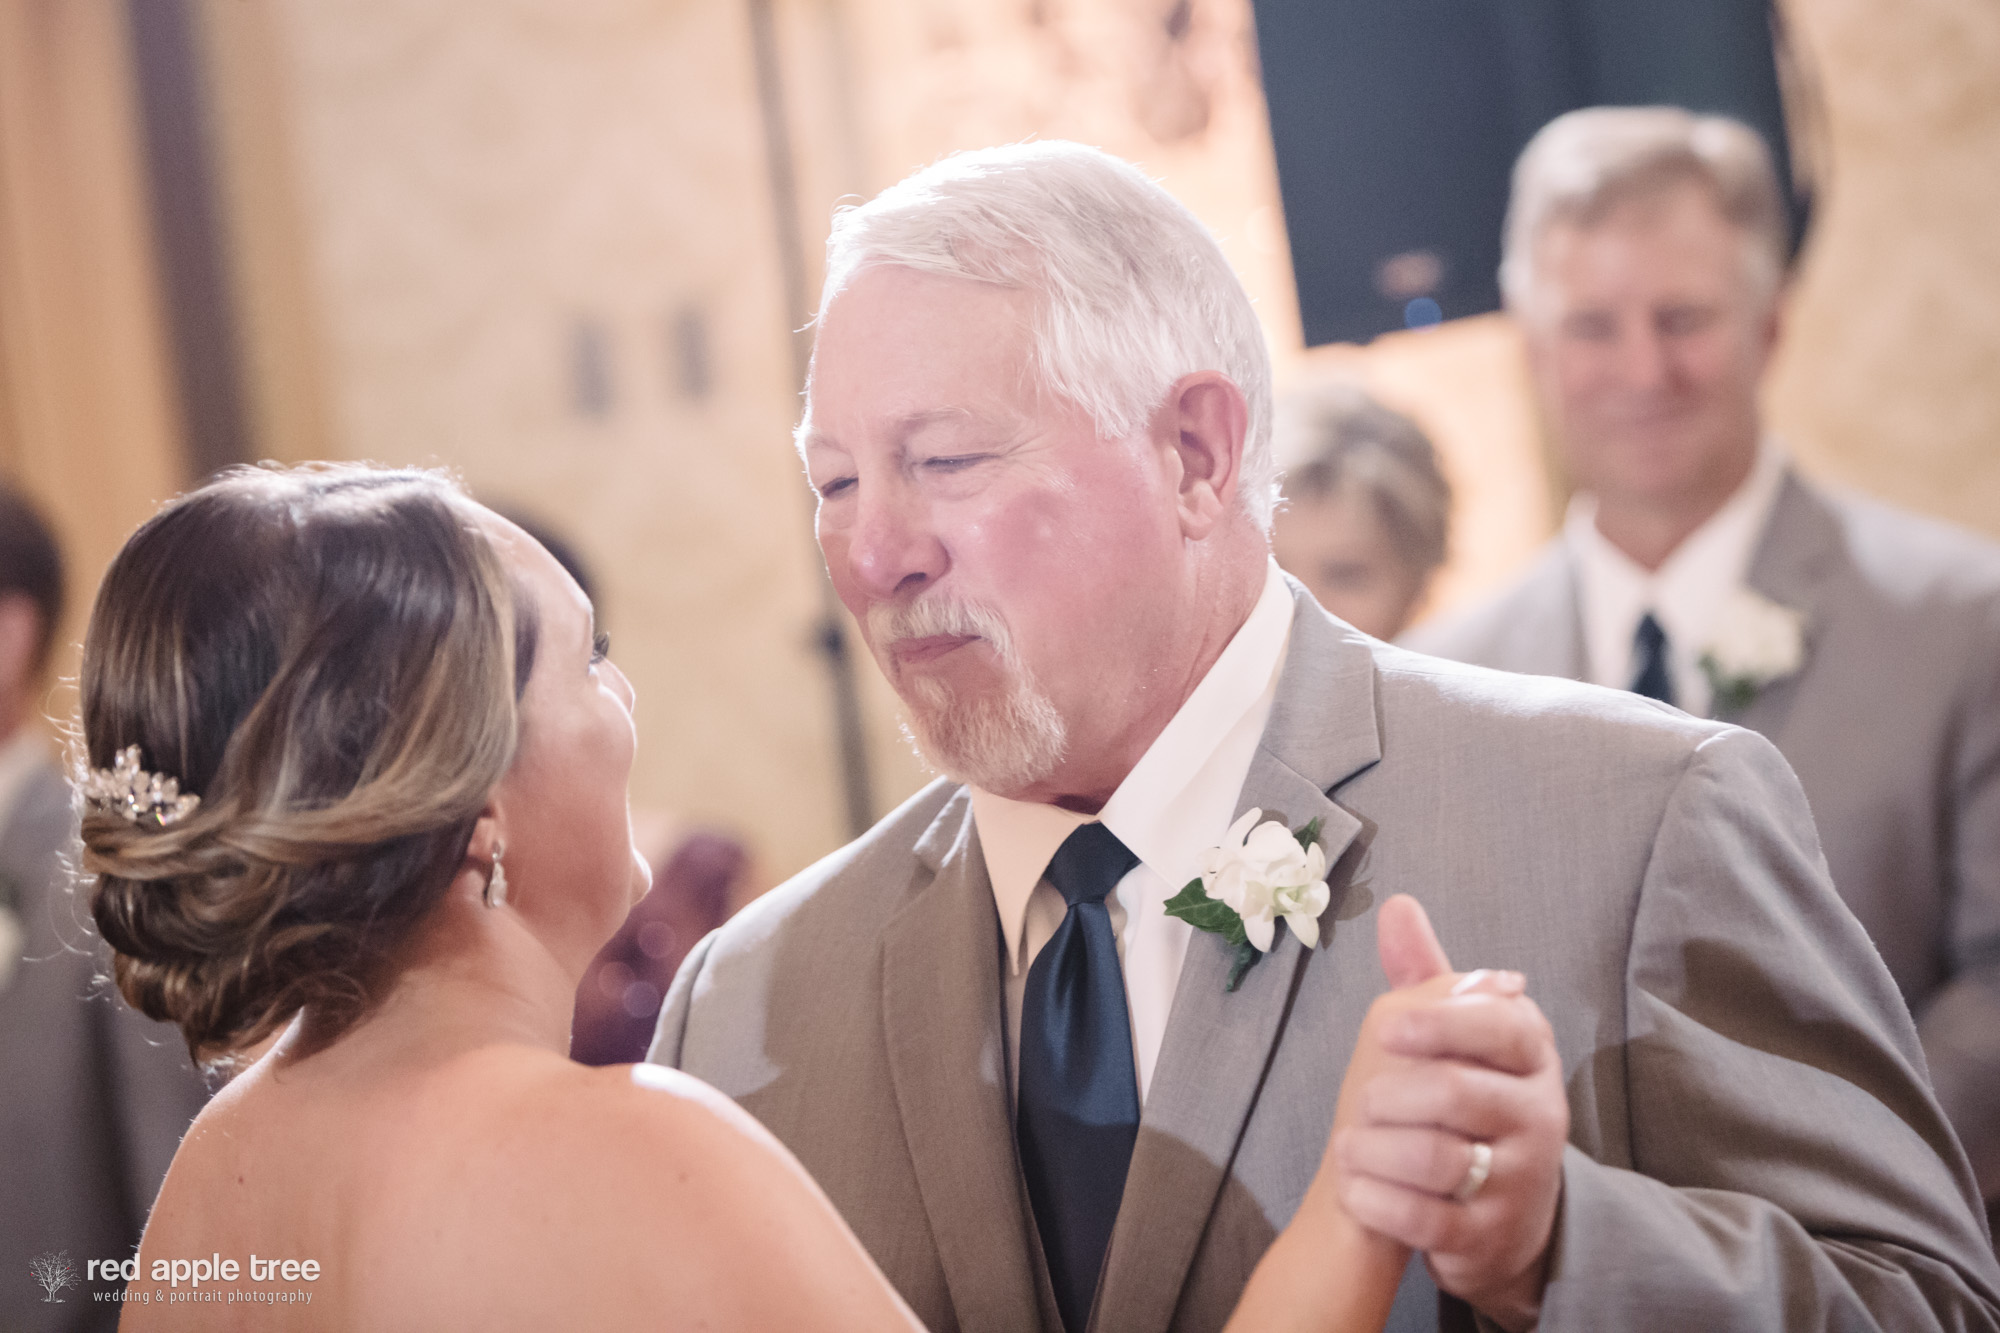  Laura and her dad's special dance was to "I Believe in You" by Steven Curtis Chapman. The look on their faces says it all. 